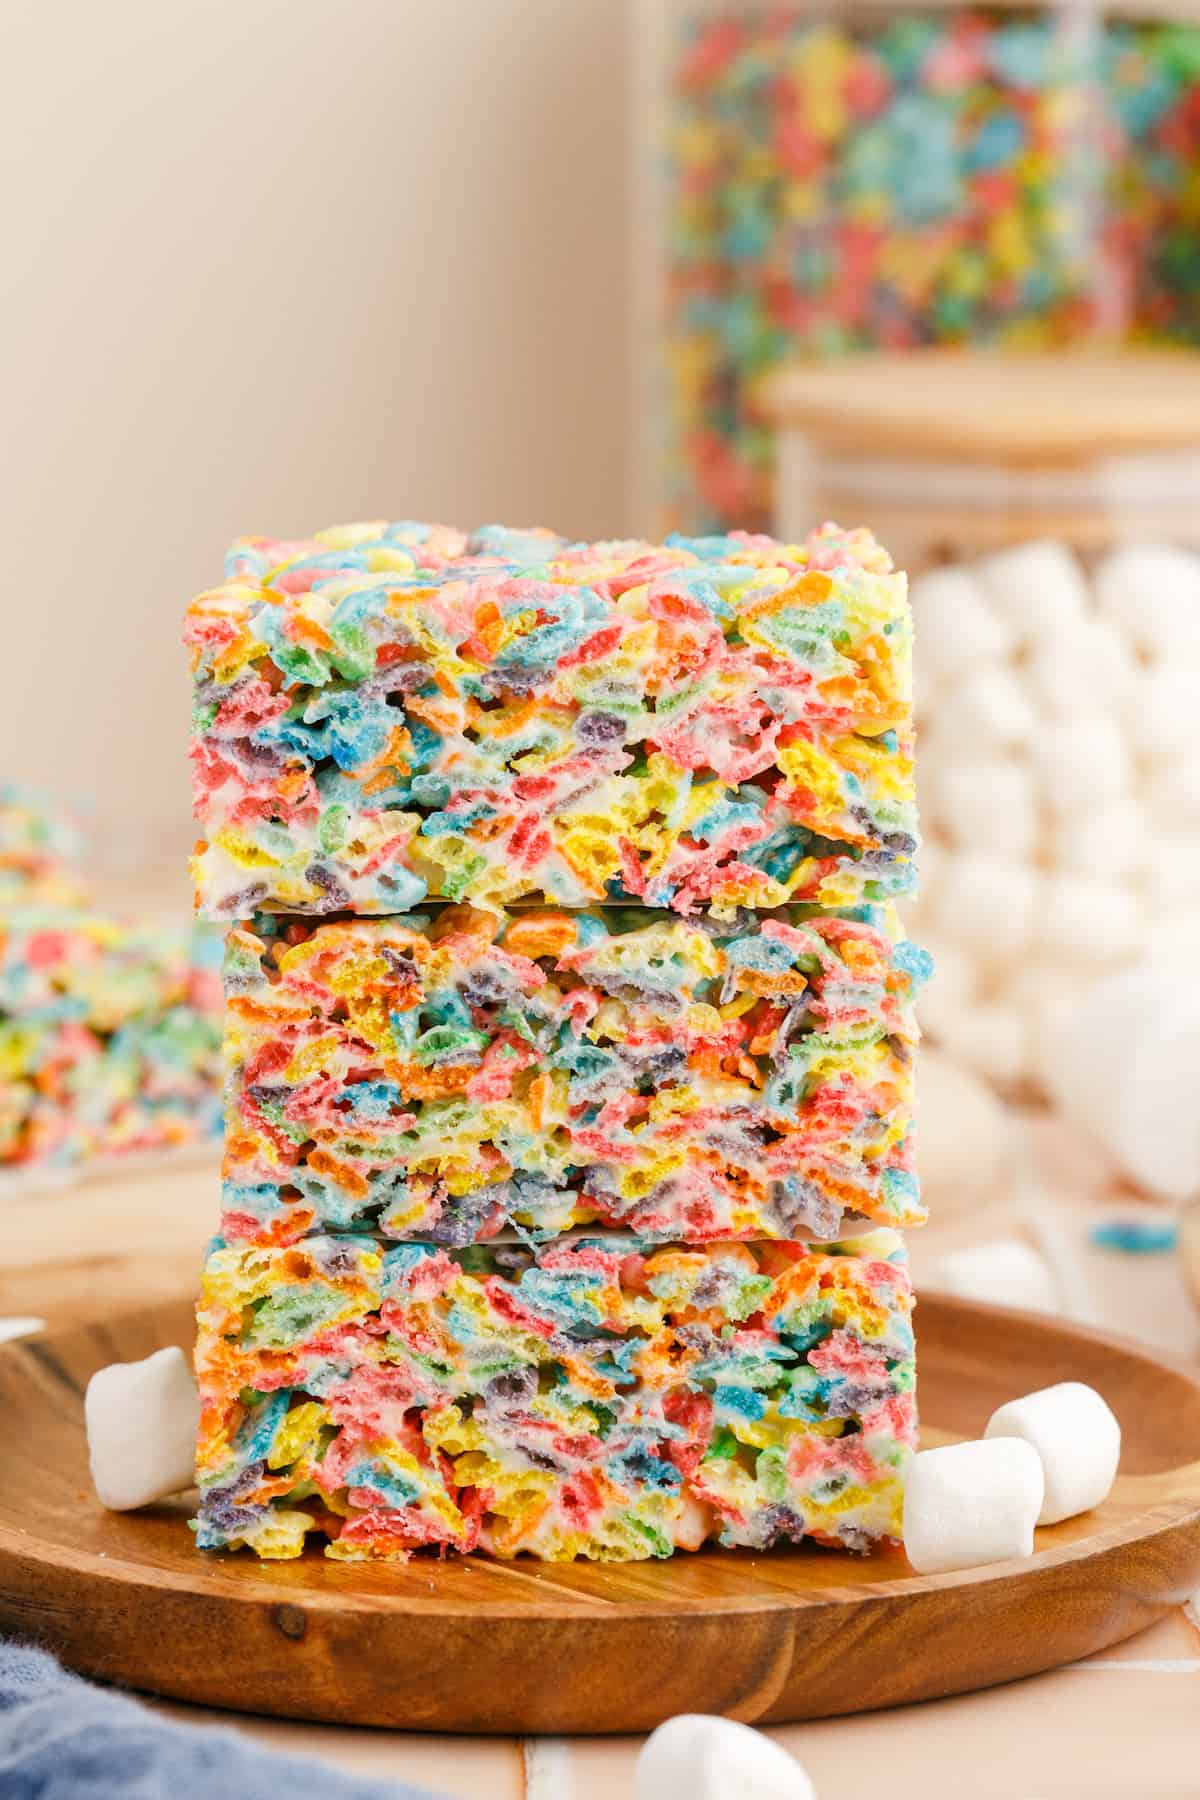 A stack of fruity pebbles treats surrounded by mini-marshmallows.